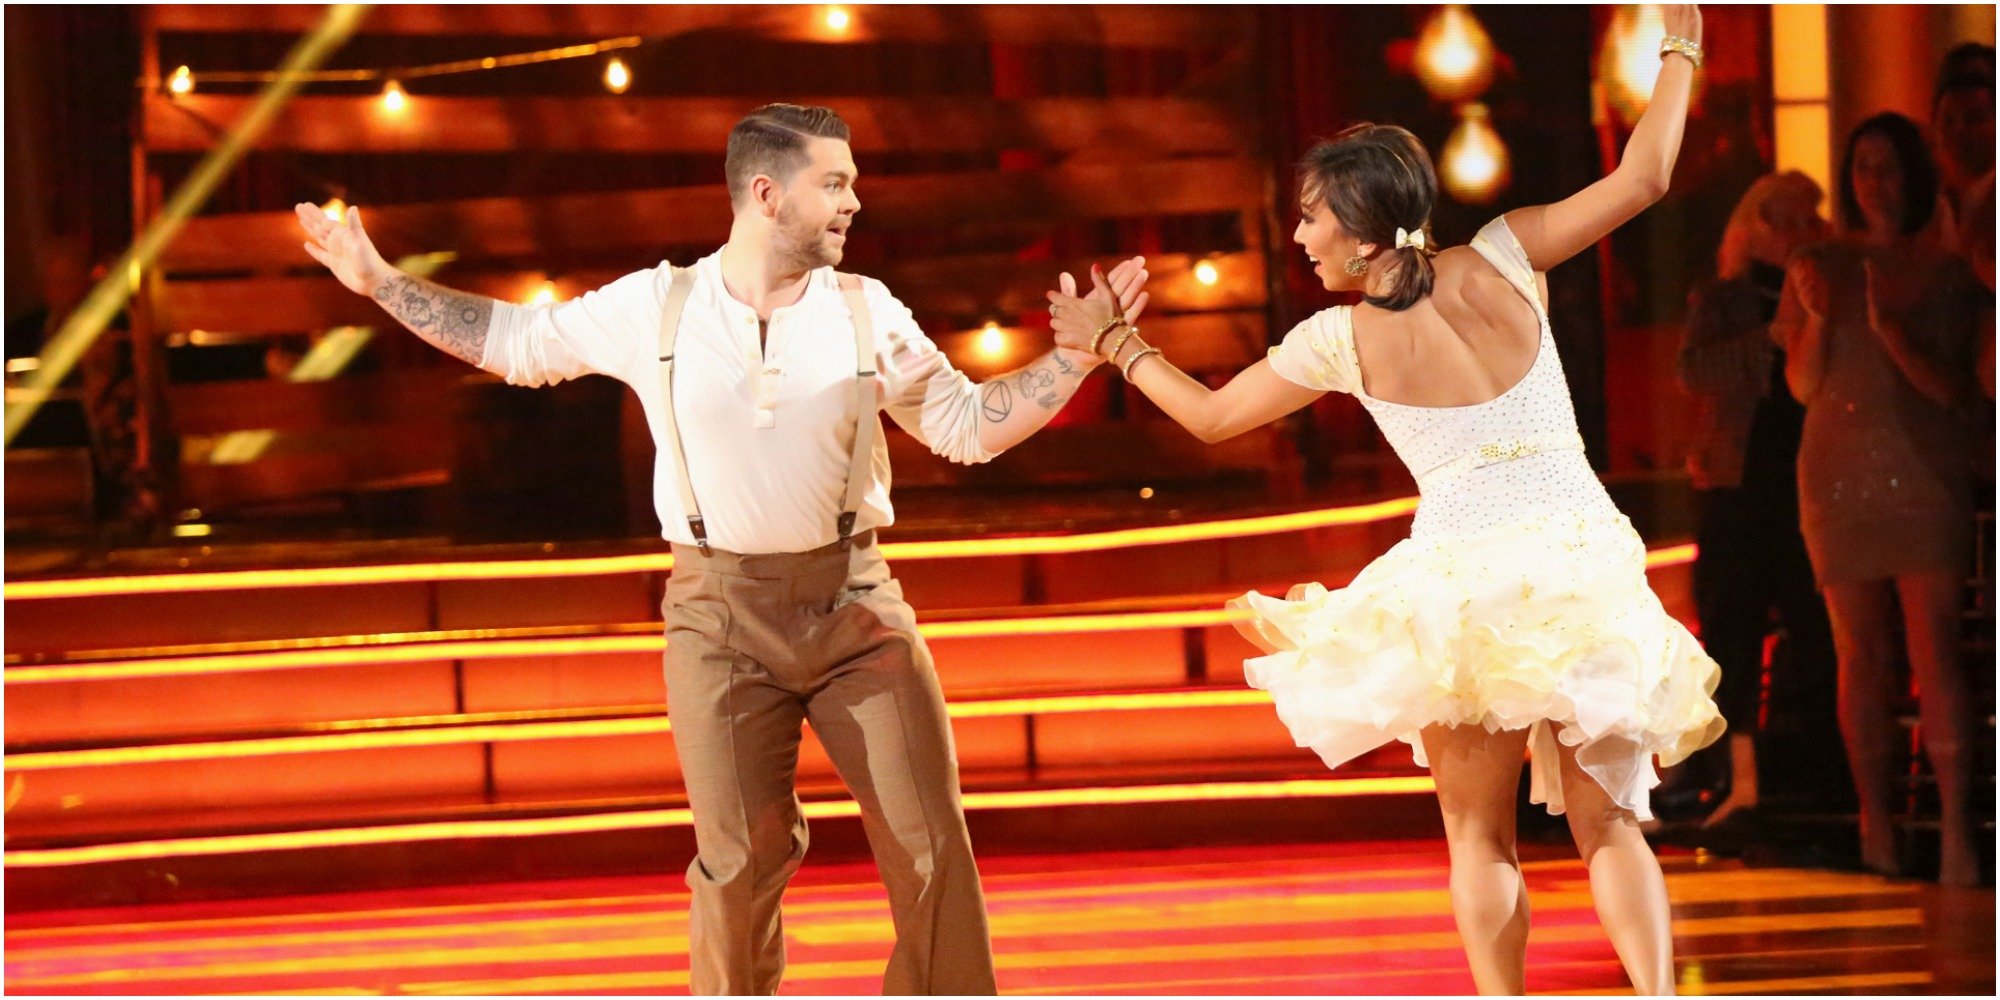 Jack Osbourne and Cheryl Burke perform during season 17 of "Dancing with the Stars."